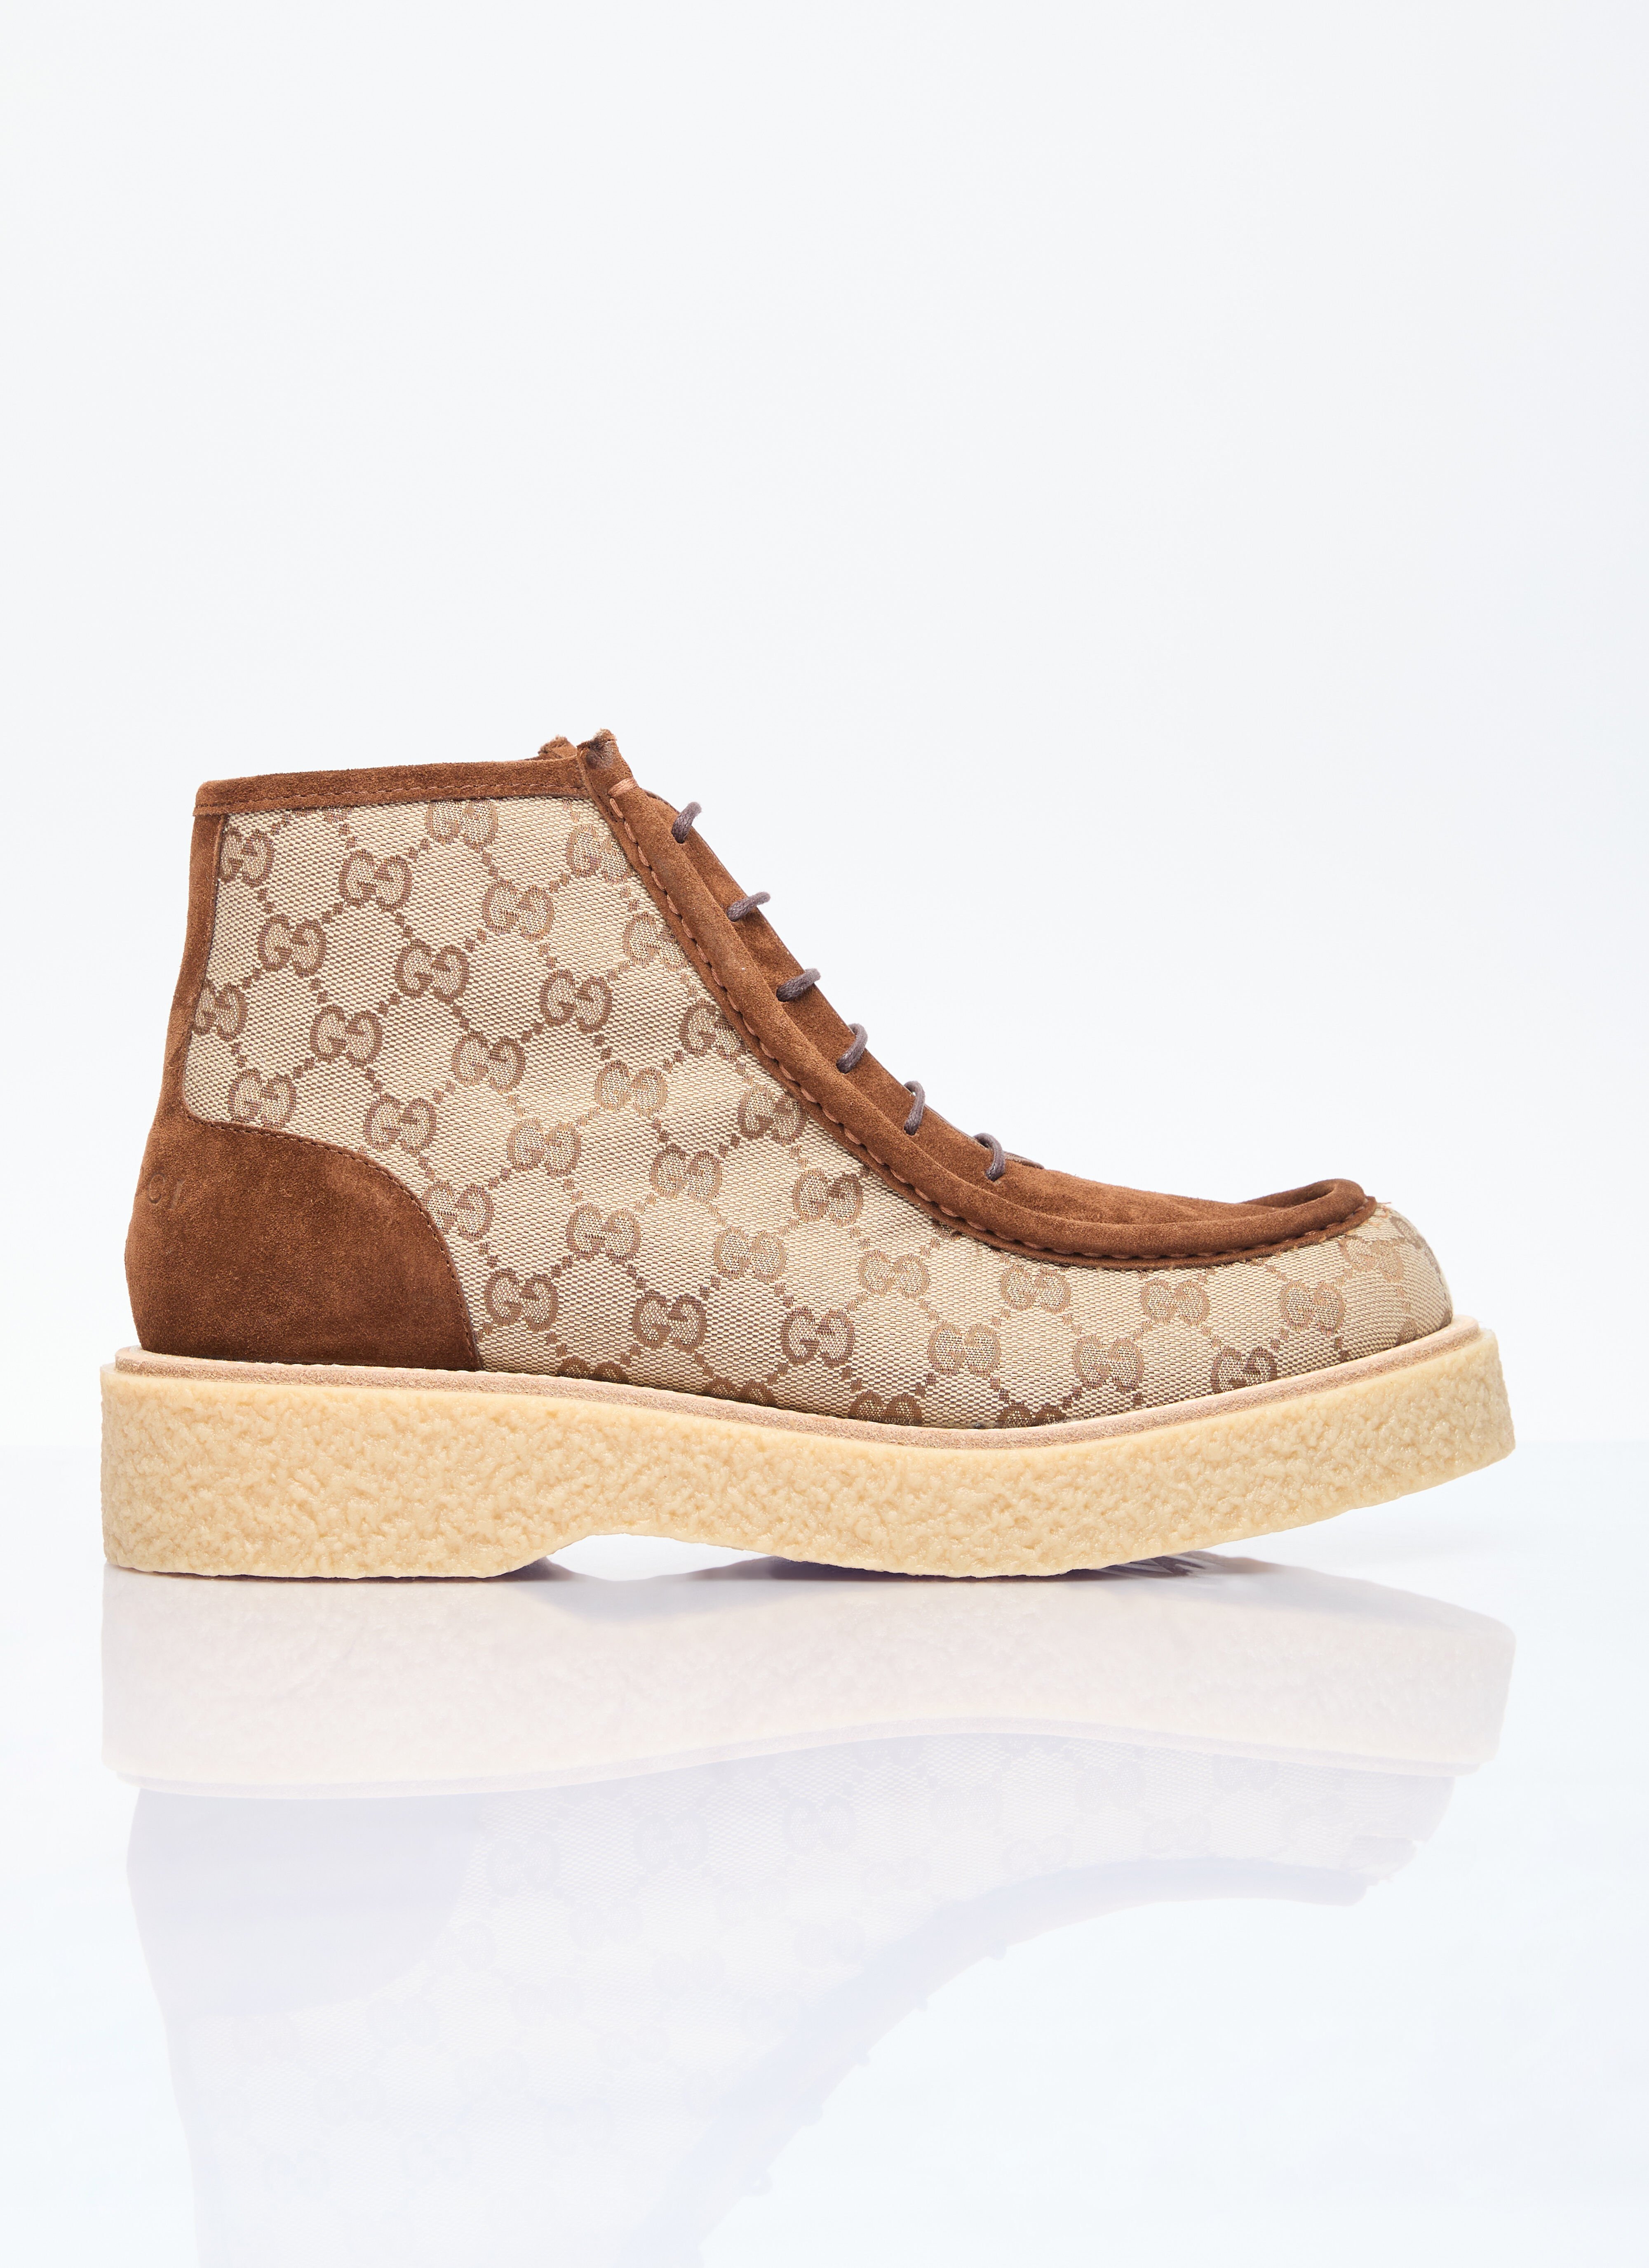 Gucci GG Canvas And Suede Lace-Up Boots Beige guc0155035